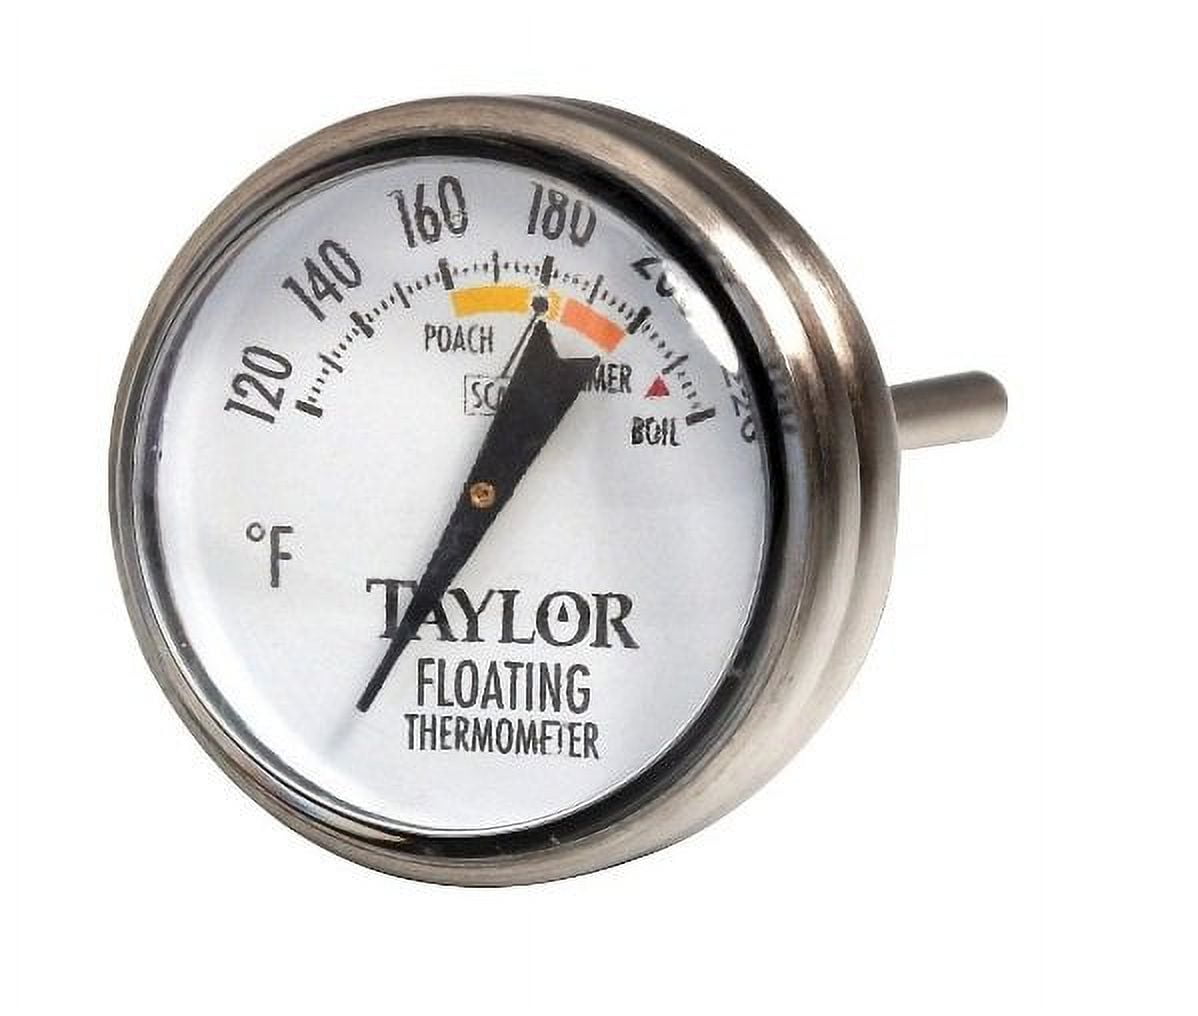 Taylor 1105 Analog Thermometer, -30 to 120 Degree F